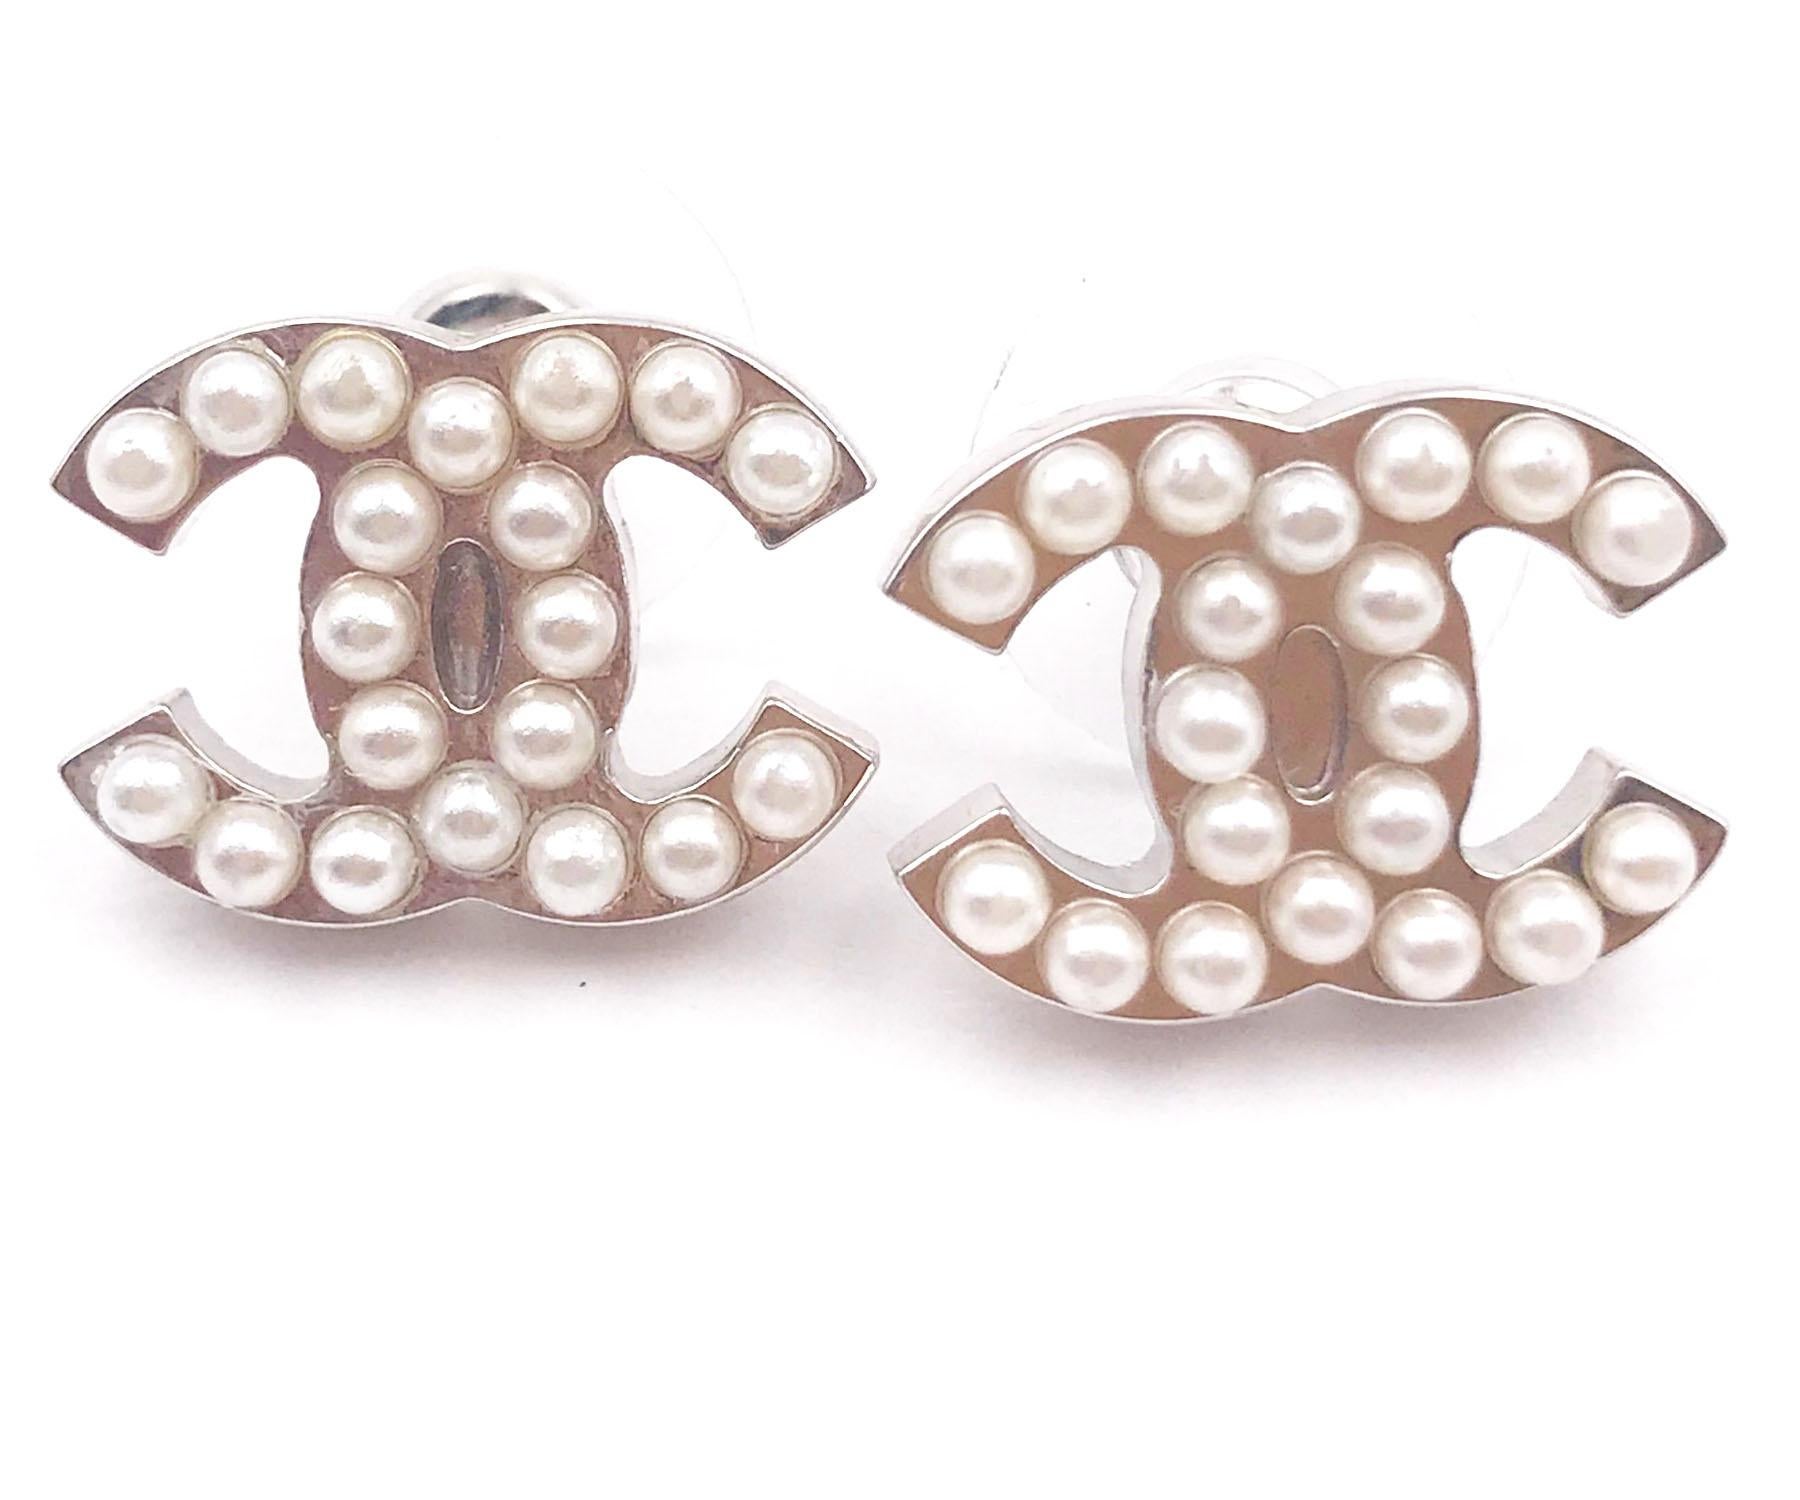 Chanel Classic Silver CC Faux Pearl Piercing Earrings

* Marked 05
* Made in France

-Approximately 0.6″ x 0.75″
-Very lovely, great for every day
-In a pristine condition

2015-41441

